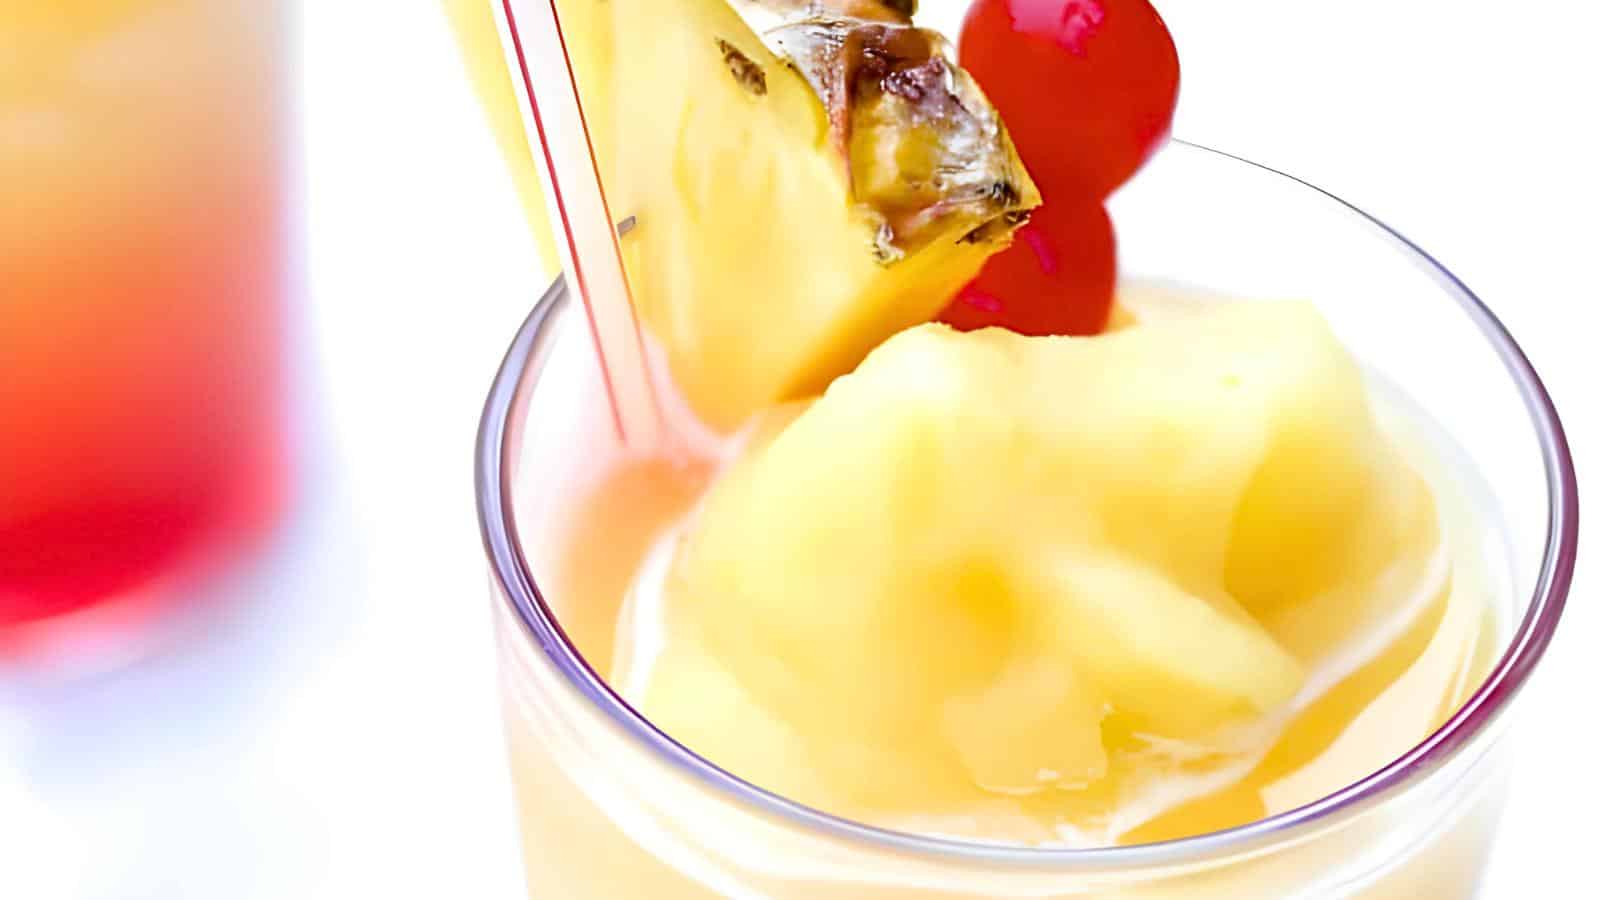 <p>Blend up a Bahama Mama for a taste of the tropics. This summer cocktail mixes rum, coconut, pineapple, and a splash of grenadine. It’s a fruity, icy delight that’s great for cooling off.<br><strong>Get the Recipe: </strong><a href="https://whippeditup.com/bahama-mama-blended-cocktails/?utm_source=msn&utm_medium=page&utm_campaign=msn" rel="noopener">Bahama Mama Blended Cocktails</a></p>